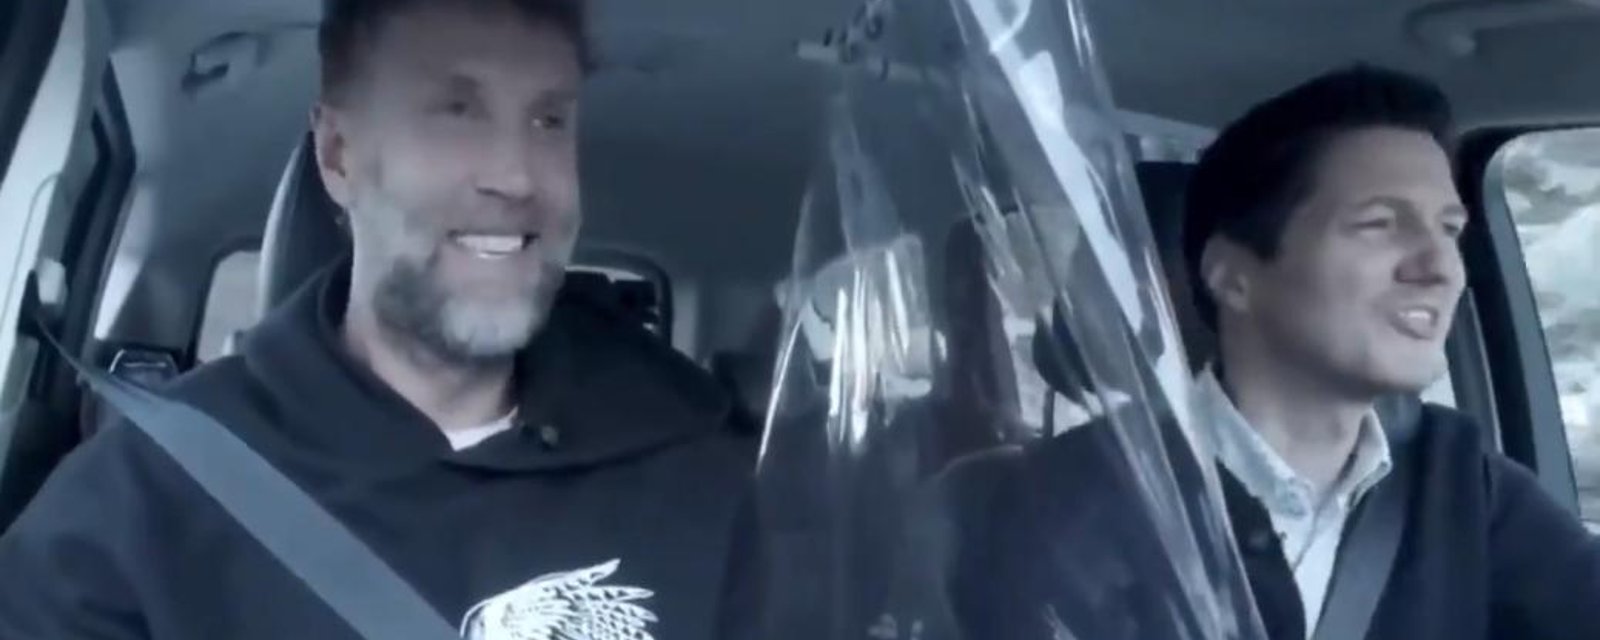 Joe Thornton belts out Britney Spears' “Baby one more time” on Swiss TV.